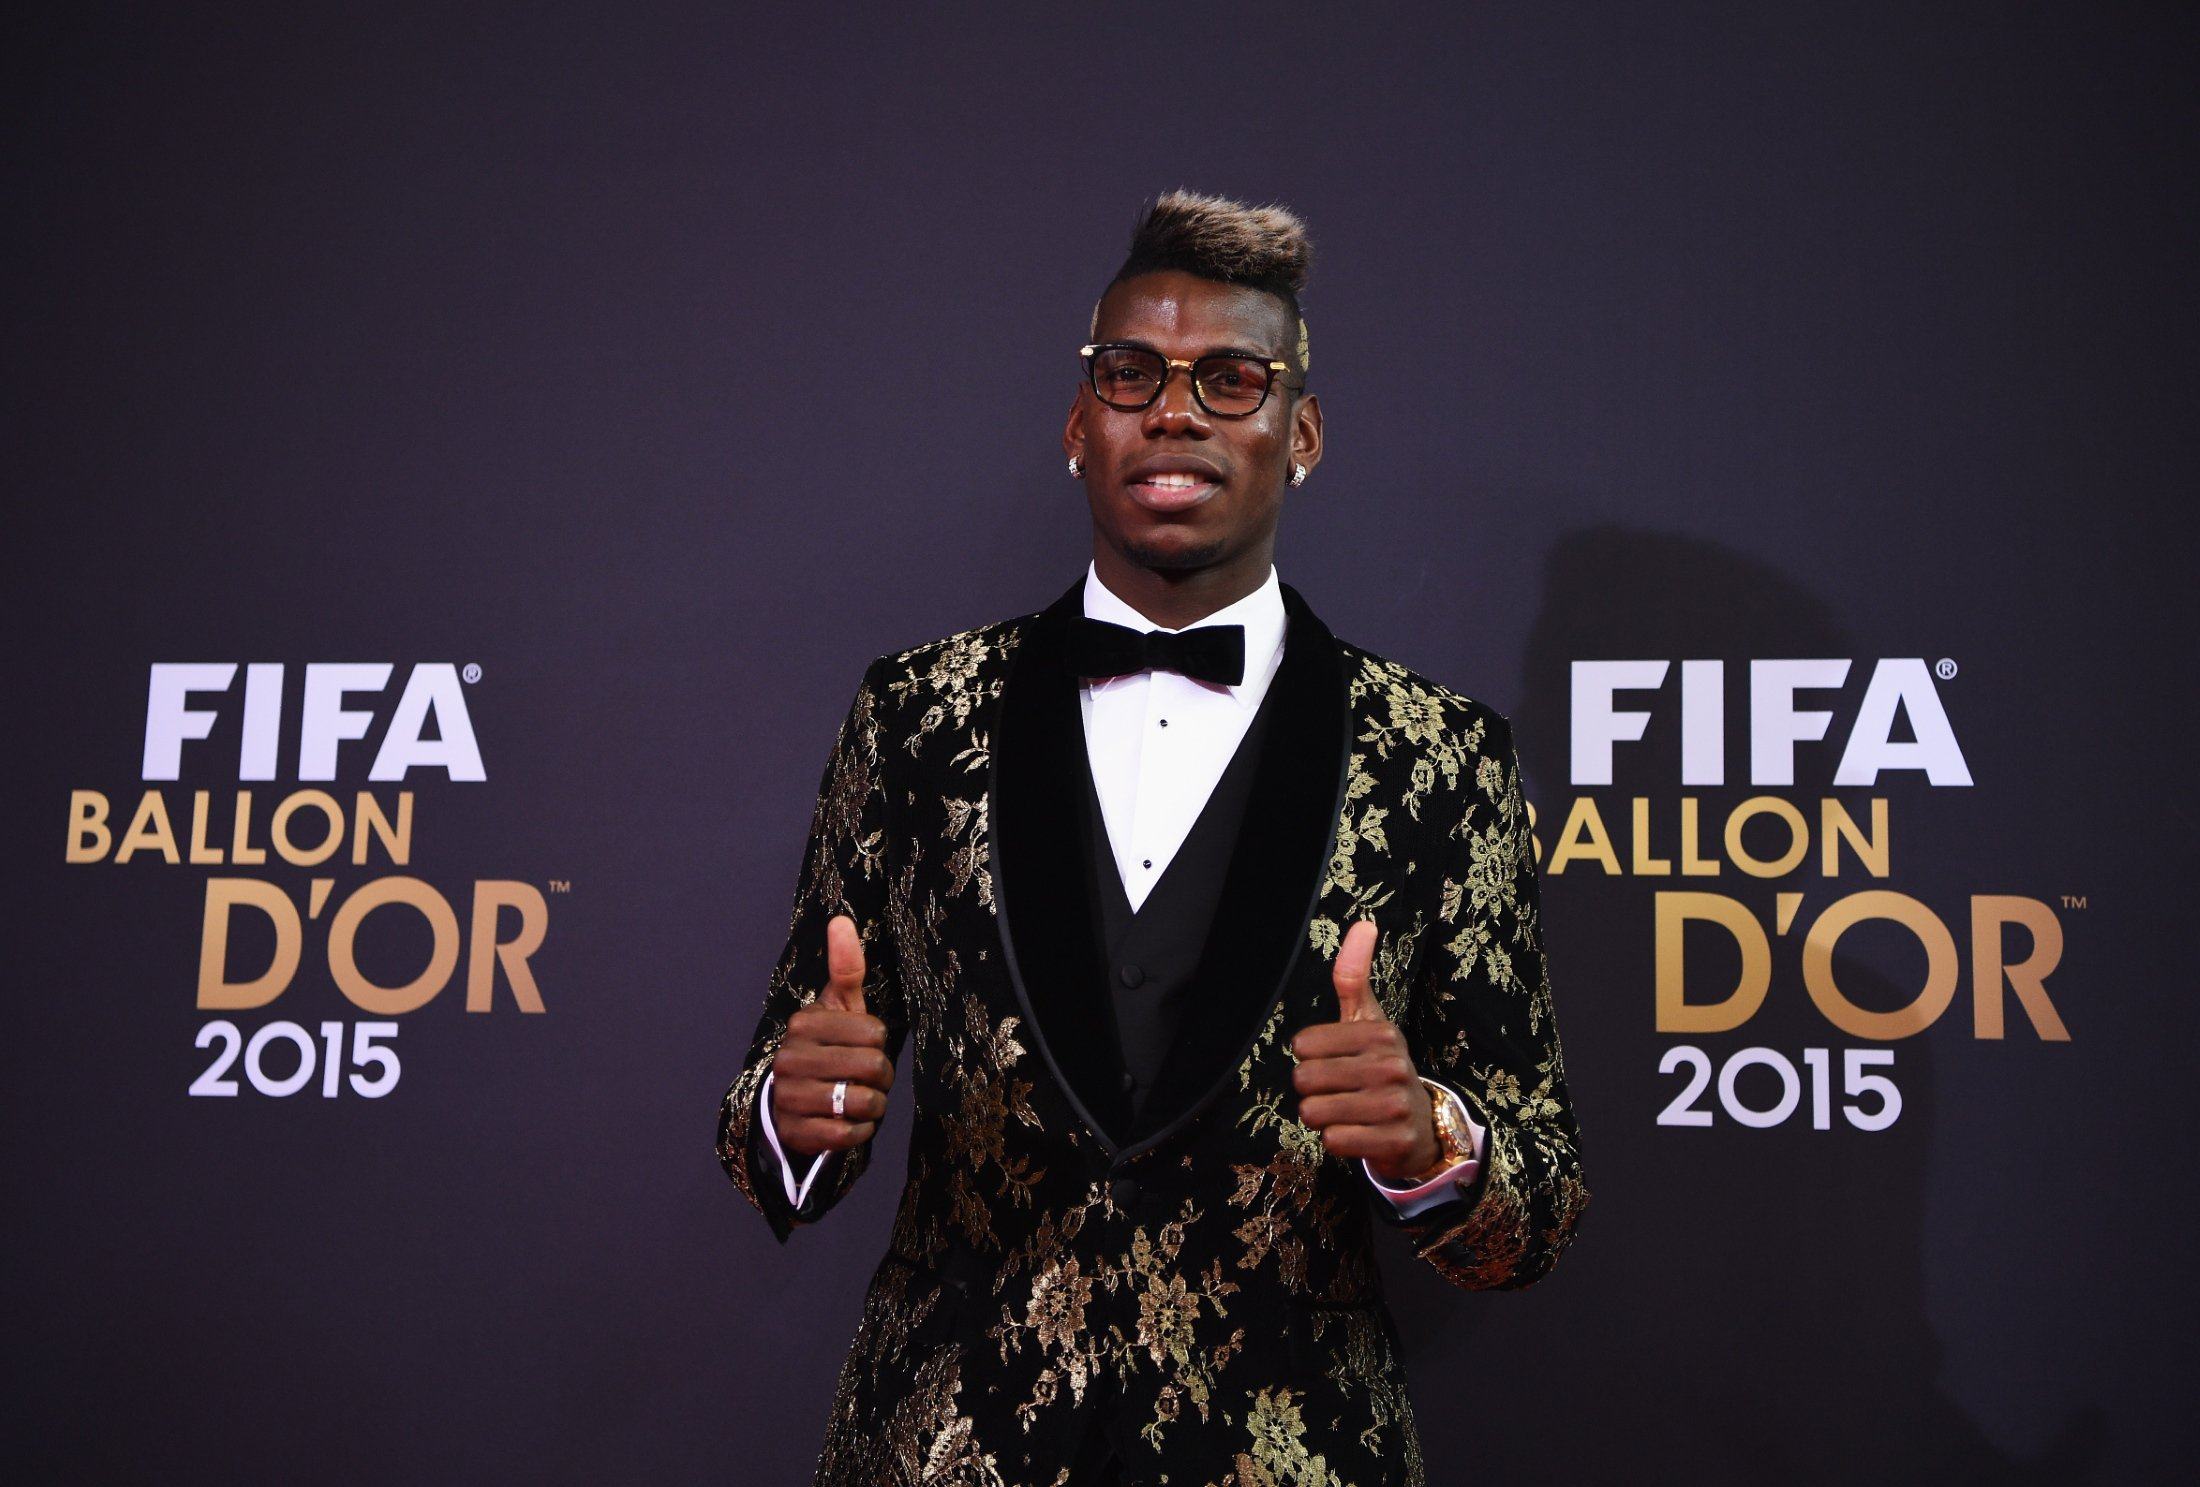 World Cup Qatar 2022: who are the best-dressed soccer players? From Neymar  to Paul Pogba, we run the rule over their closets